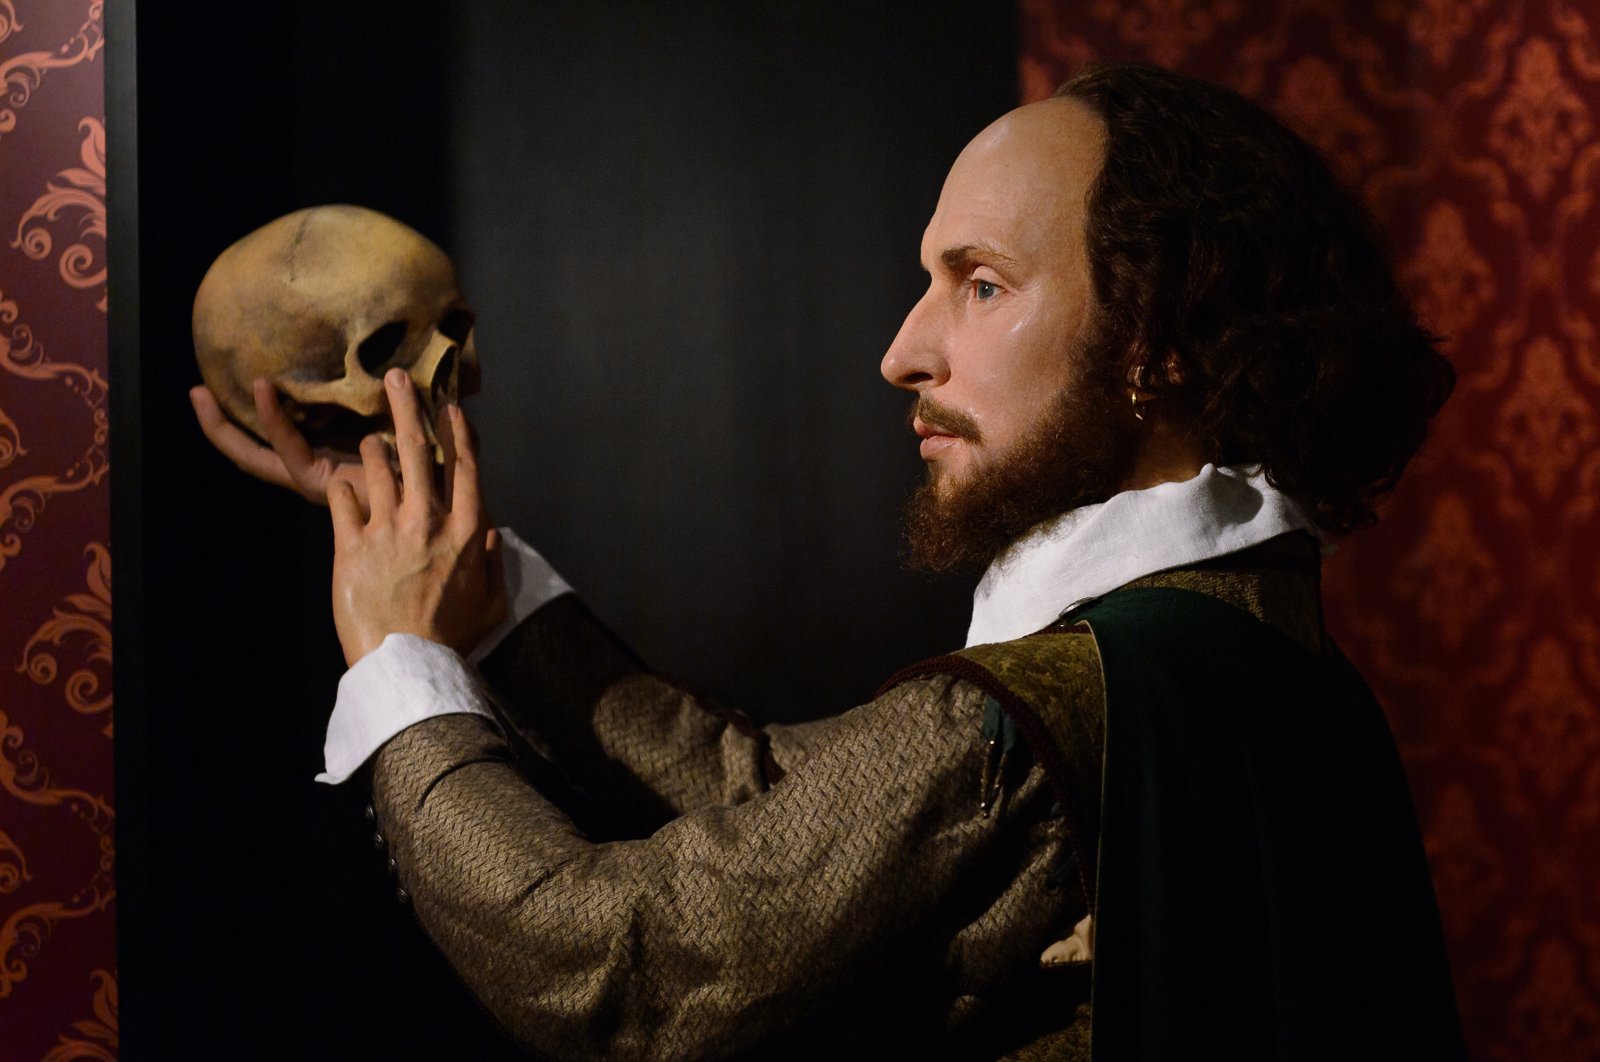 William Shakespeare, an English poet, playwright, in Madame Tussauds wax museum, Berlin, Germany, Oct. 1, 2017. (Shutterstock Photo)